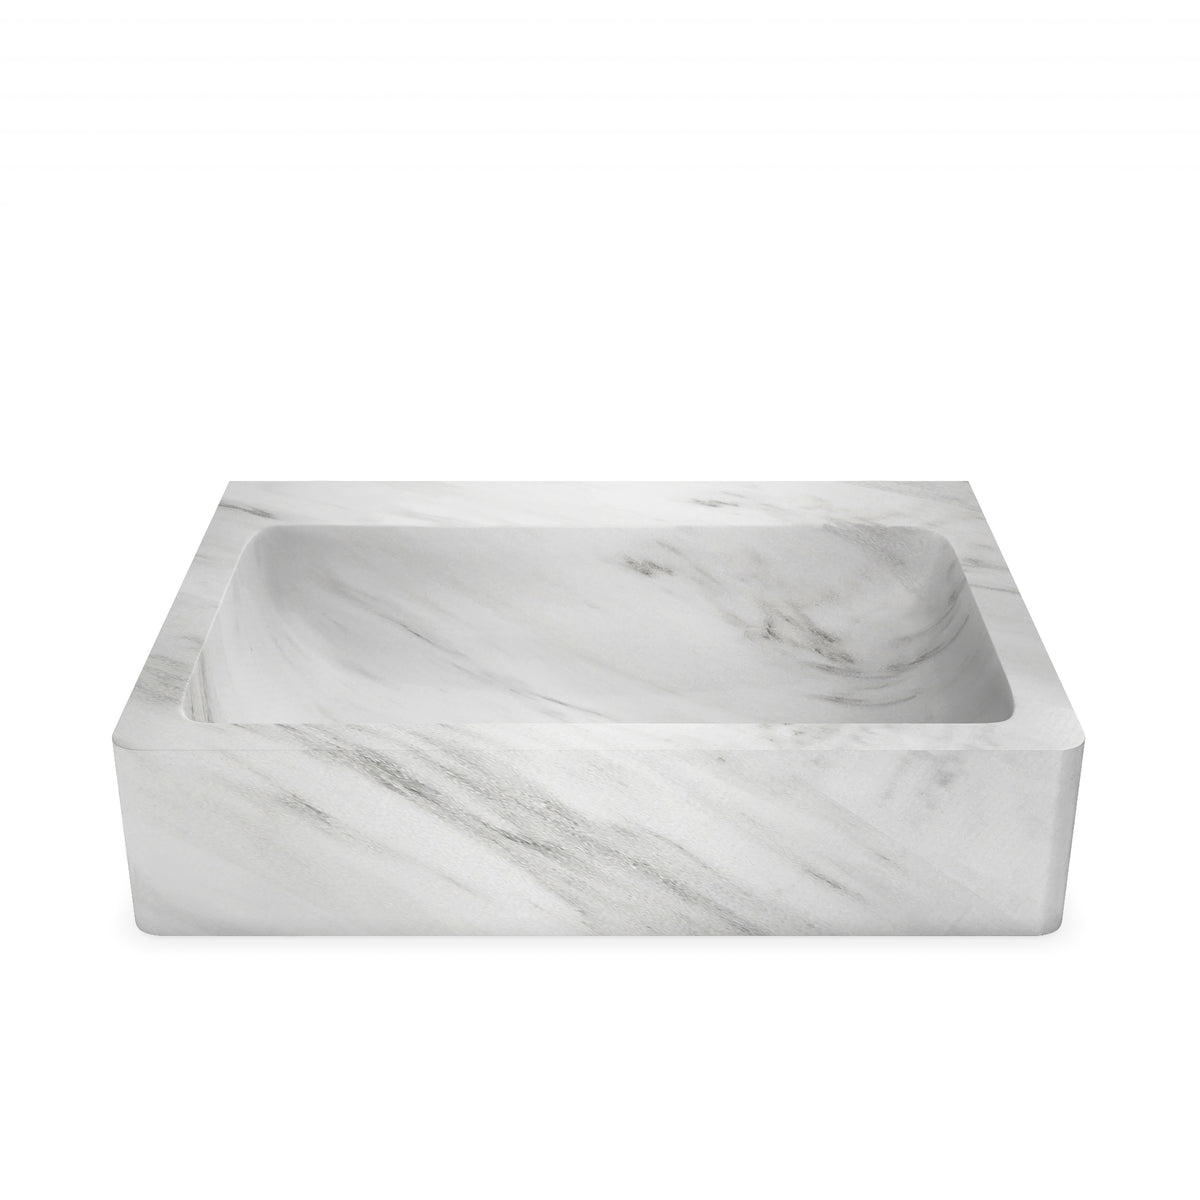 Lorenzo shown in Danby Marble. Main Product Slider View